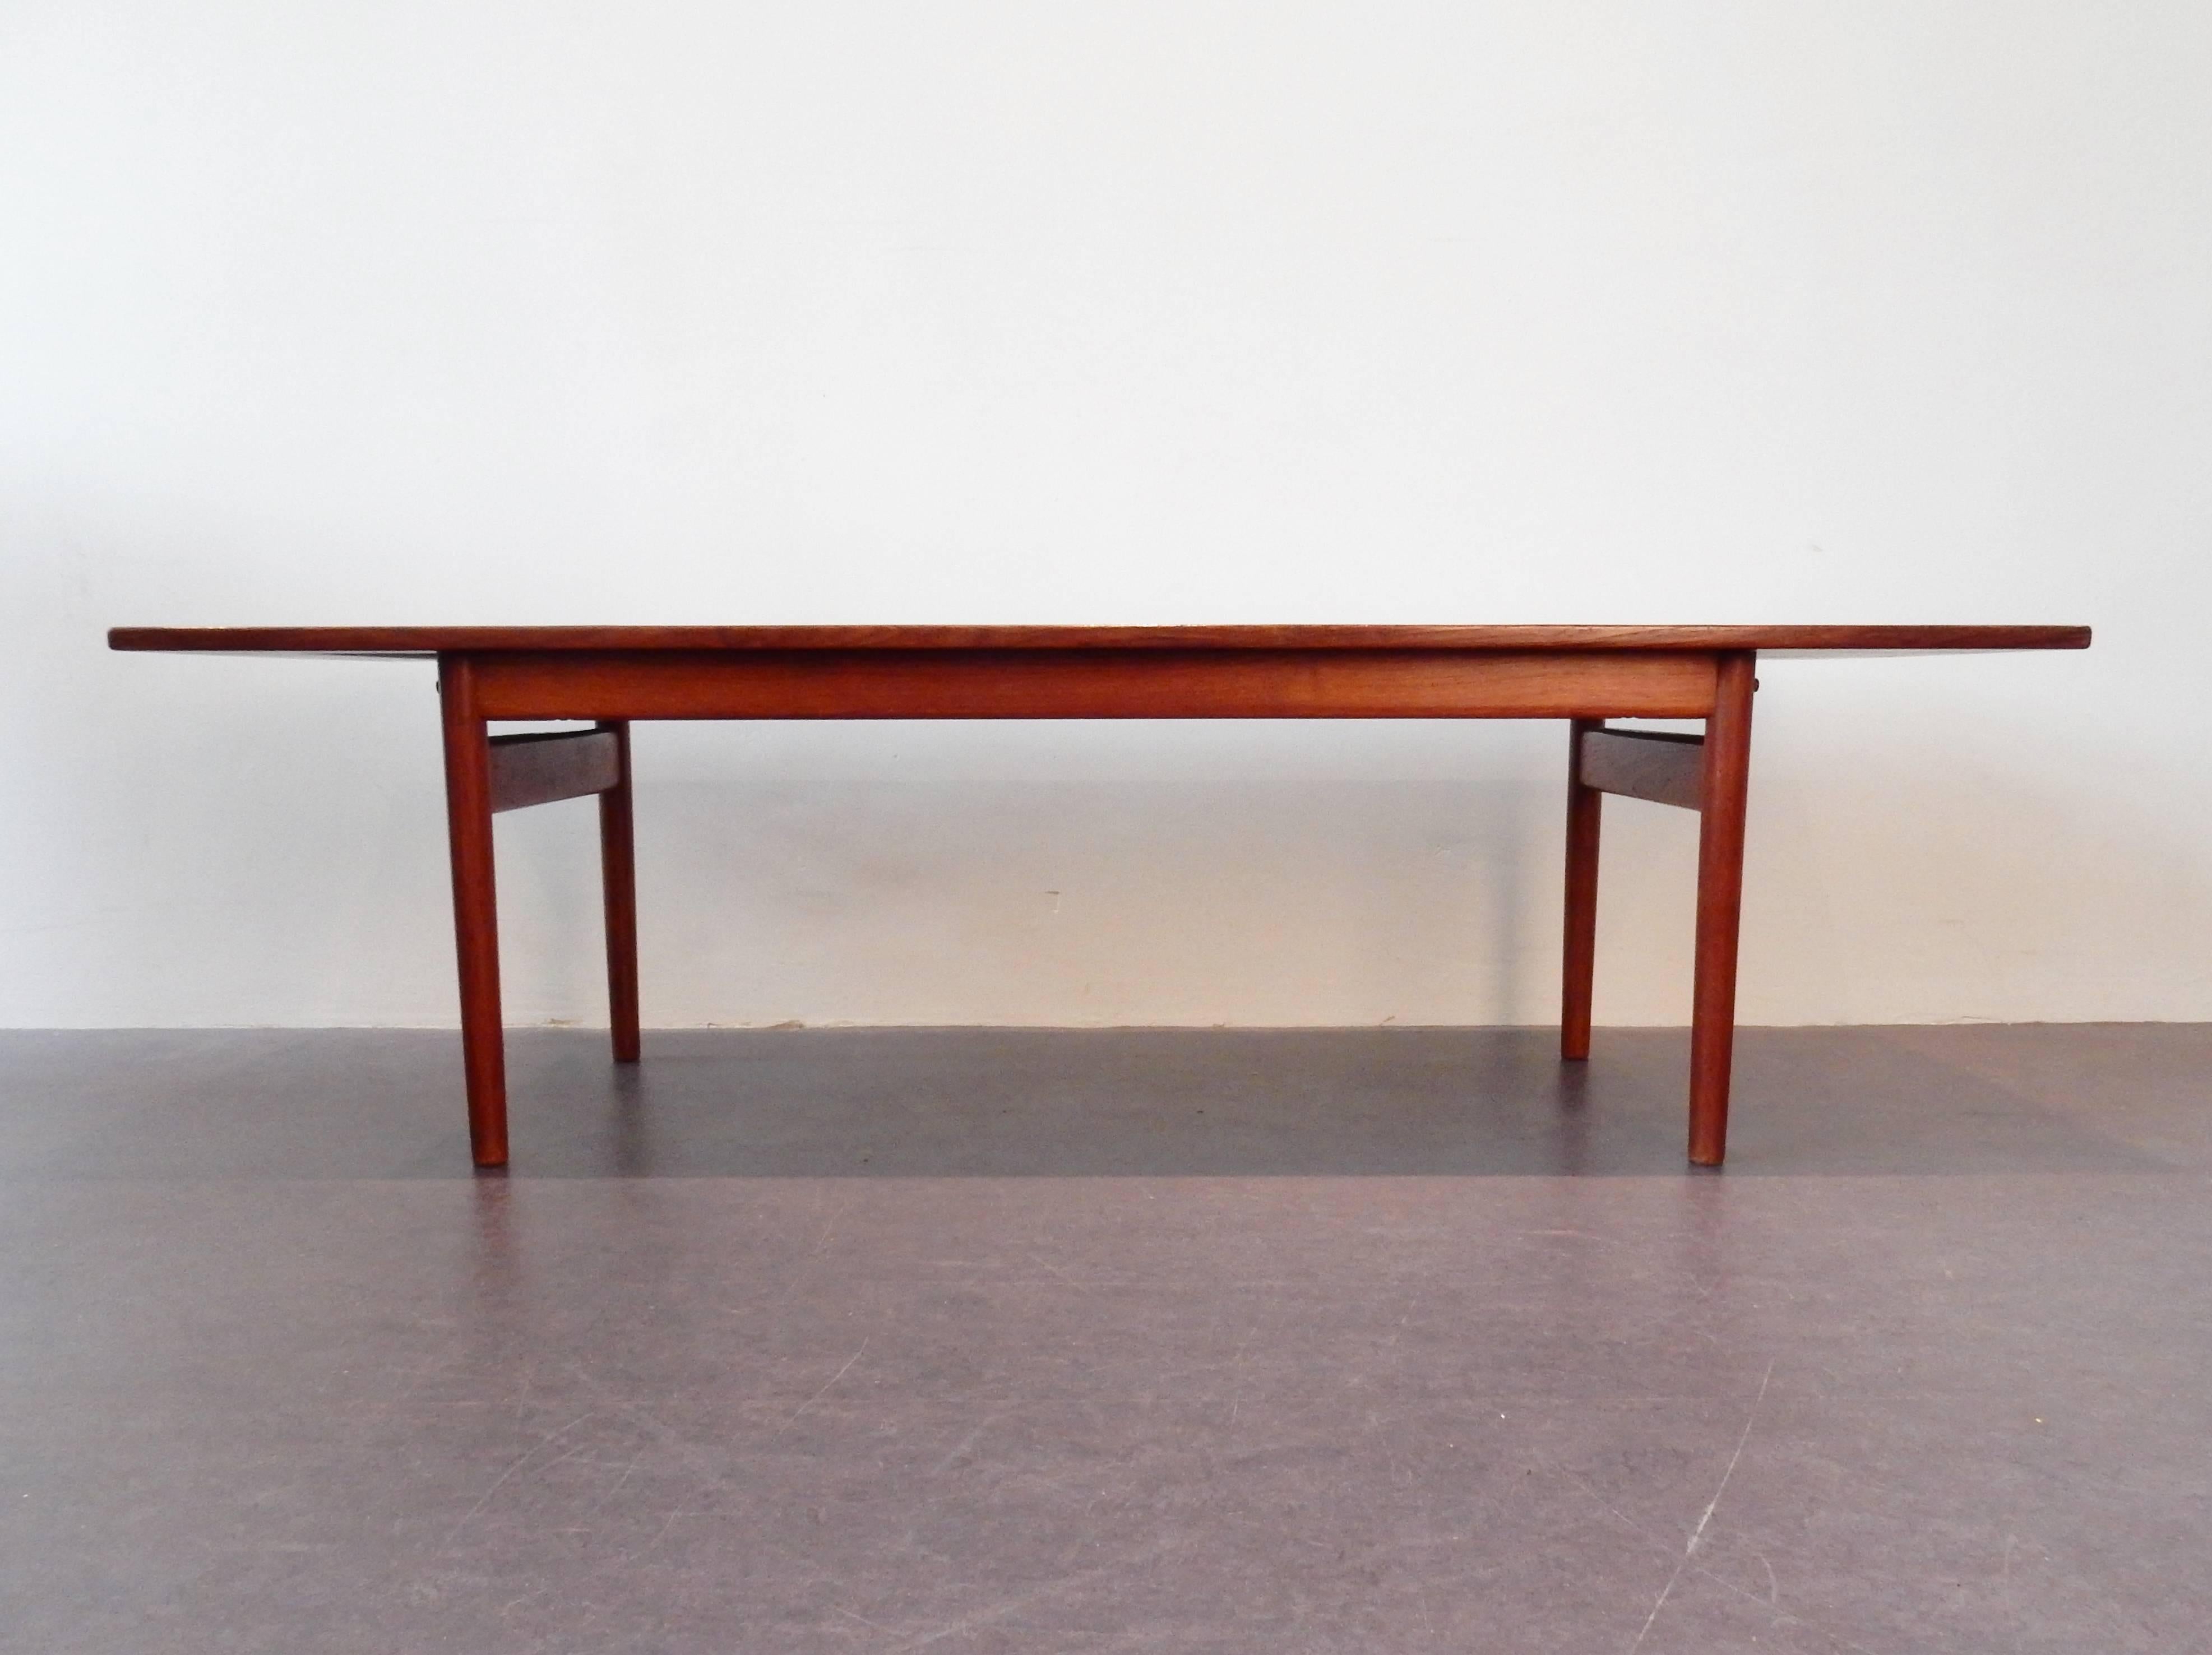 Beautiful piece of Danish design by Grete Jalk for Poul Jeppesen Møbelfabrik, Denmark. Labelled on the bottom with the paper labels.
This table is a more rare model and holds a black metal serving tray.
The table is in a very good condition. The